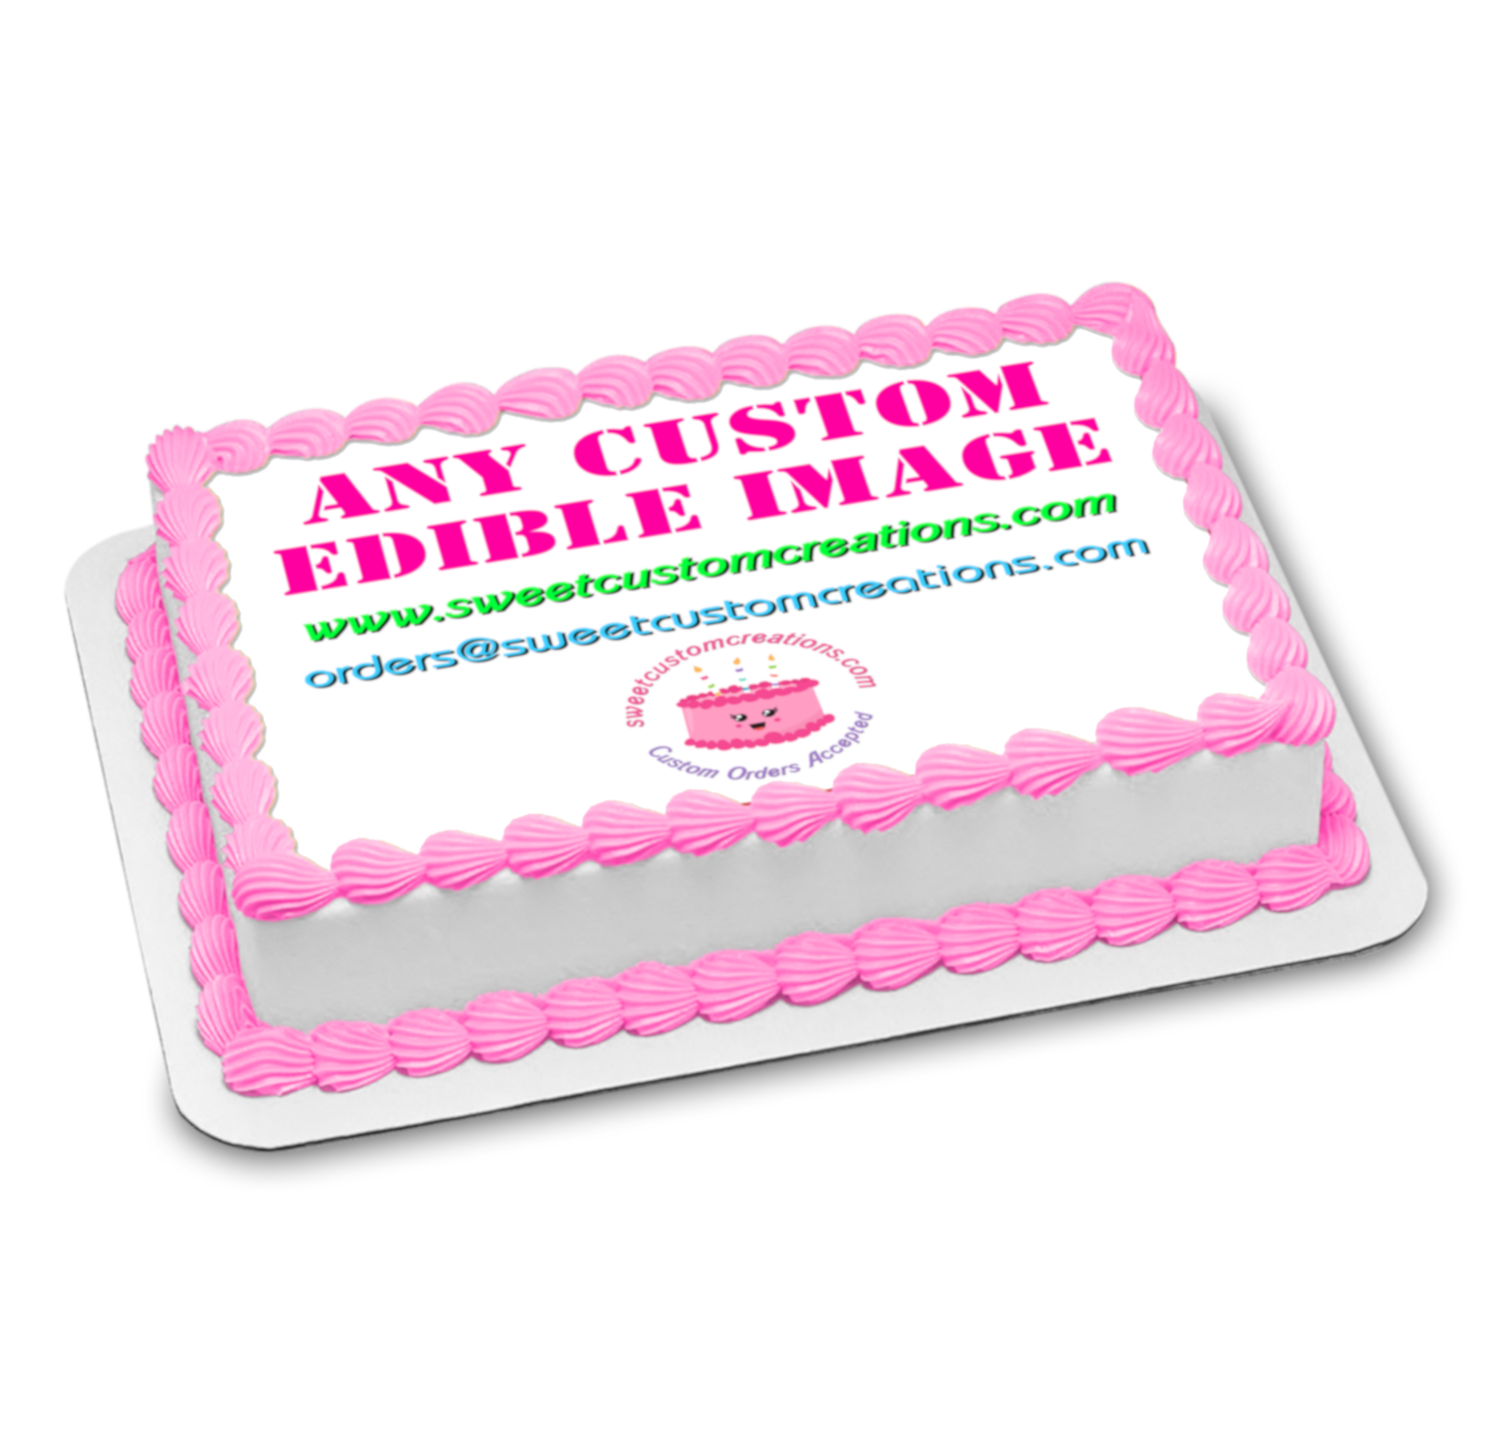 Veuve Cliquot Champagne Edible Image Frosting Sheet #1 (70+ sizes) – Sweet  Custom Creations